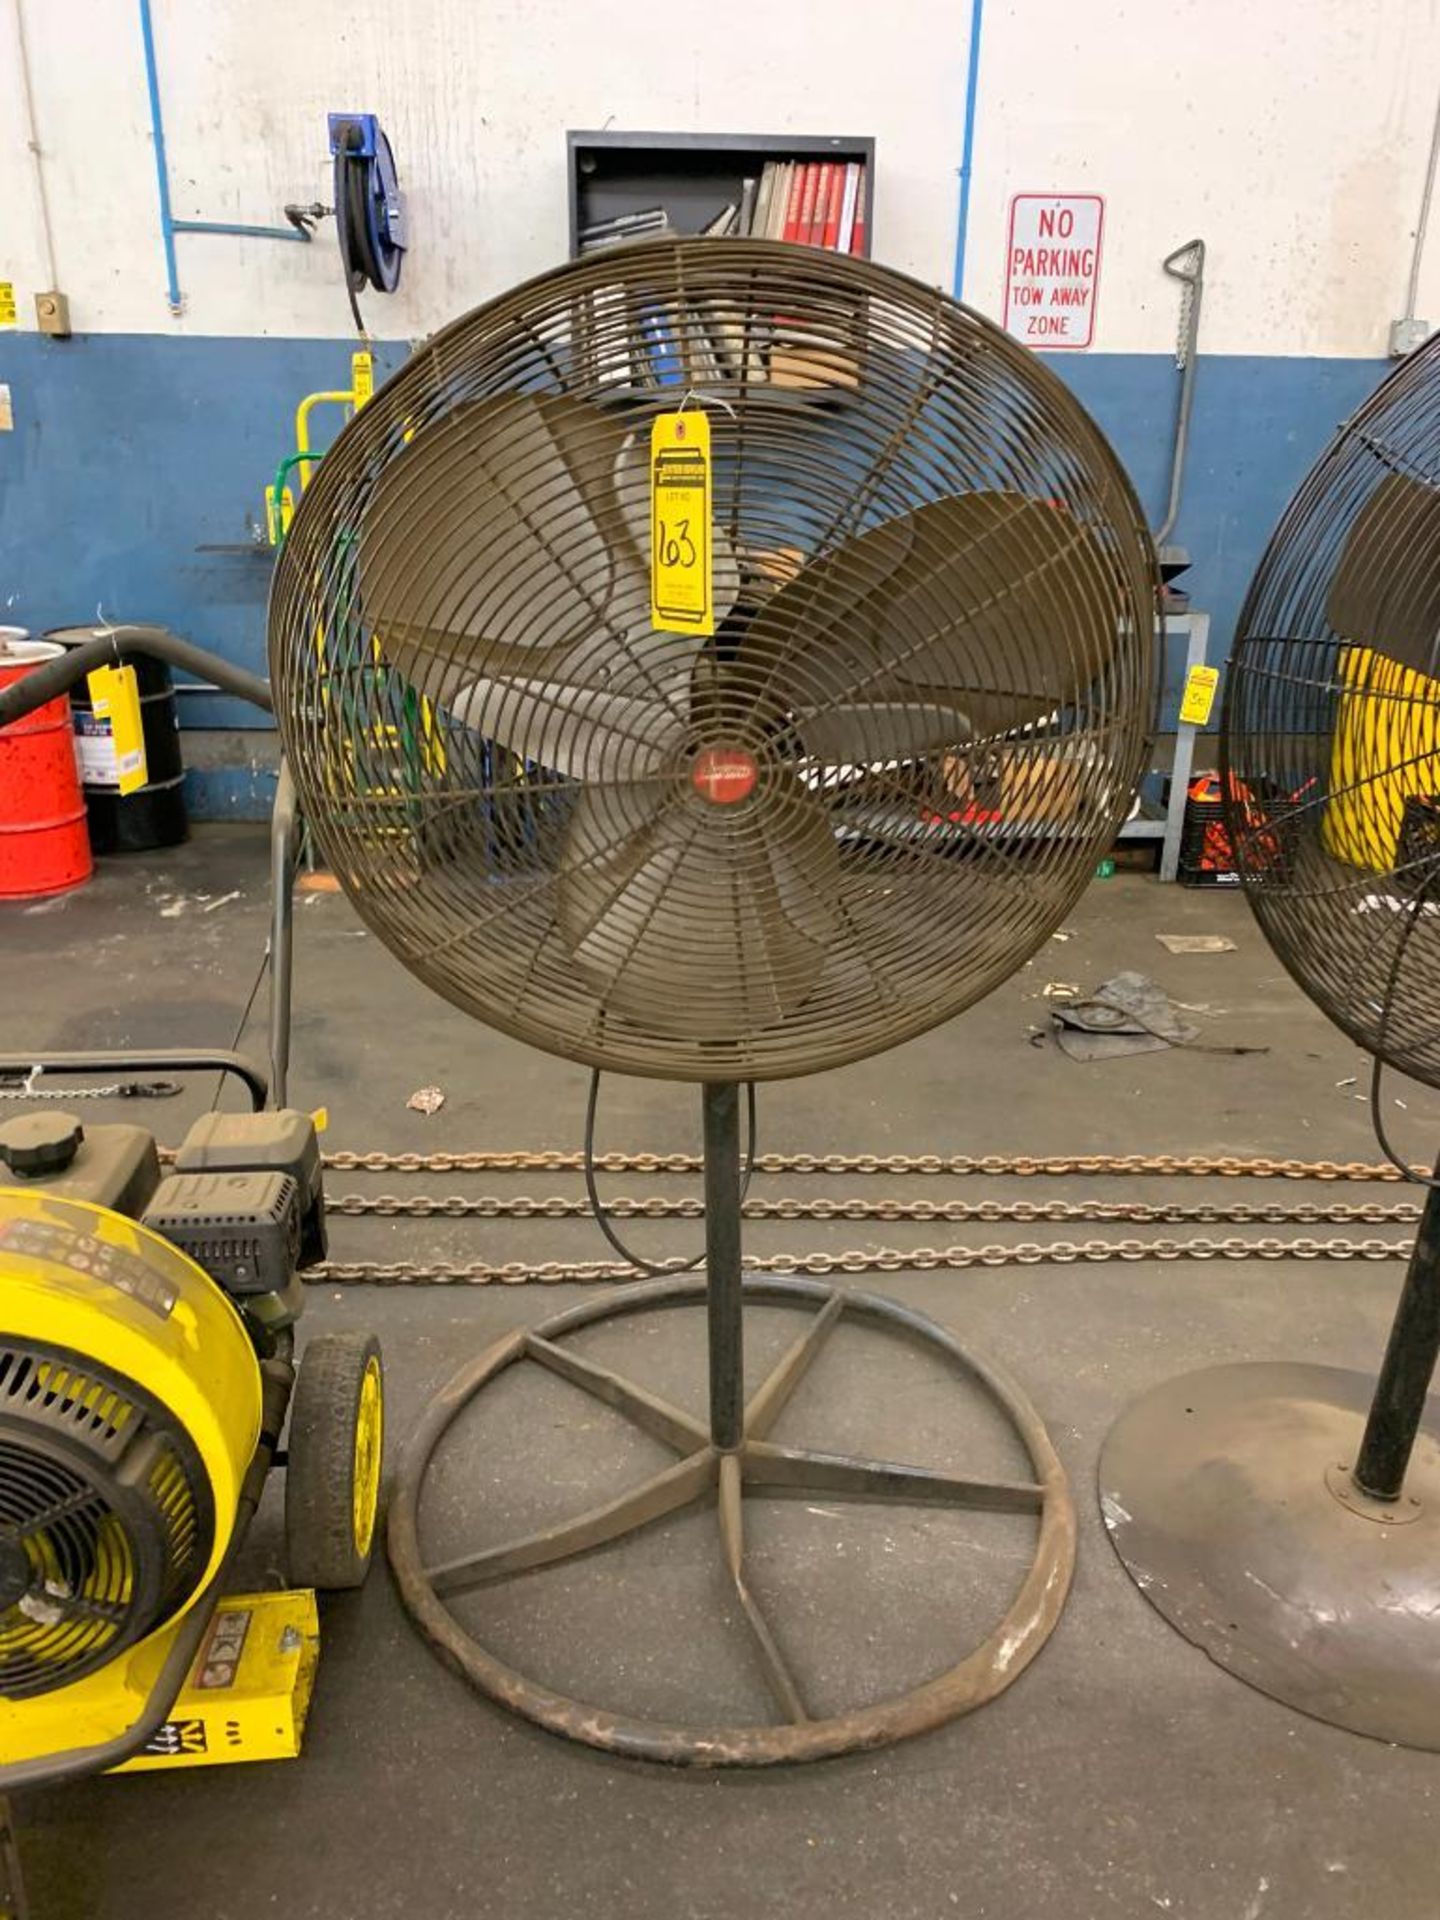 Dayton 30" Pedestal Fan ($10 Loading Fee will be added to buyers invoice)